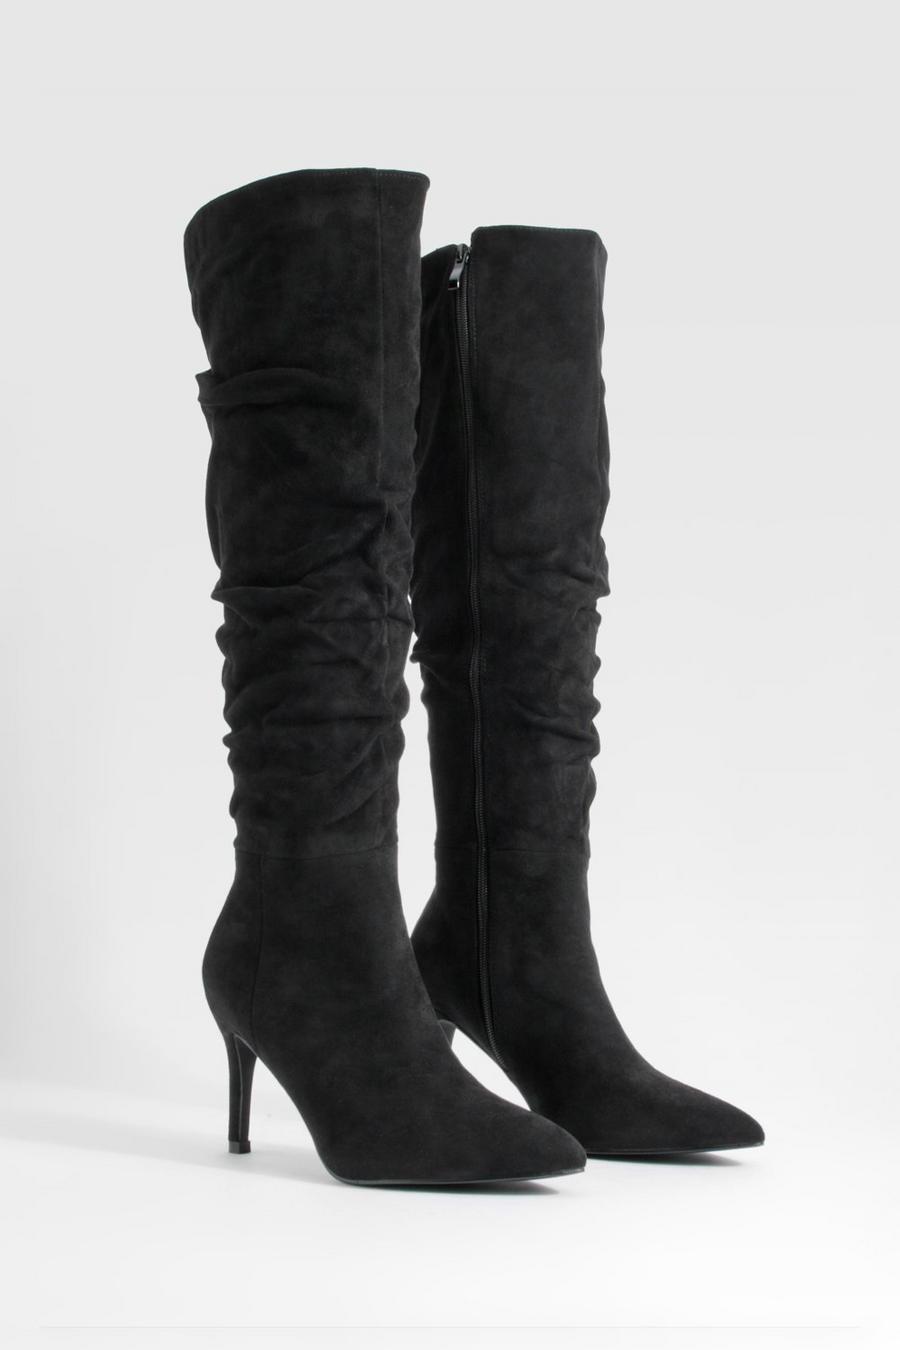 Black Ruched Stiletto Knee High Boots 